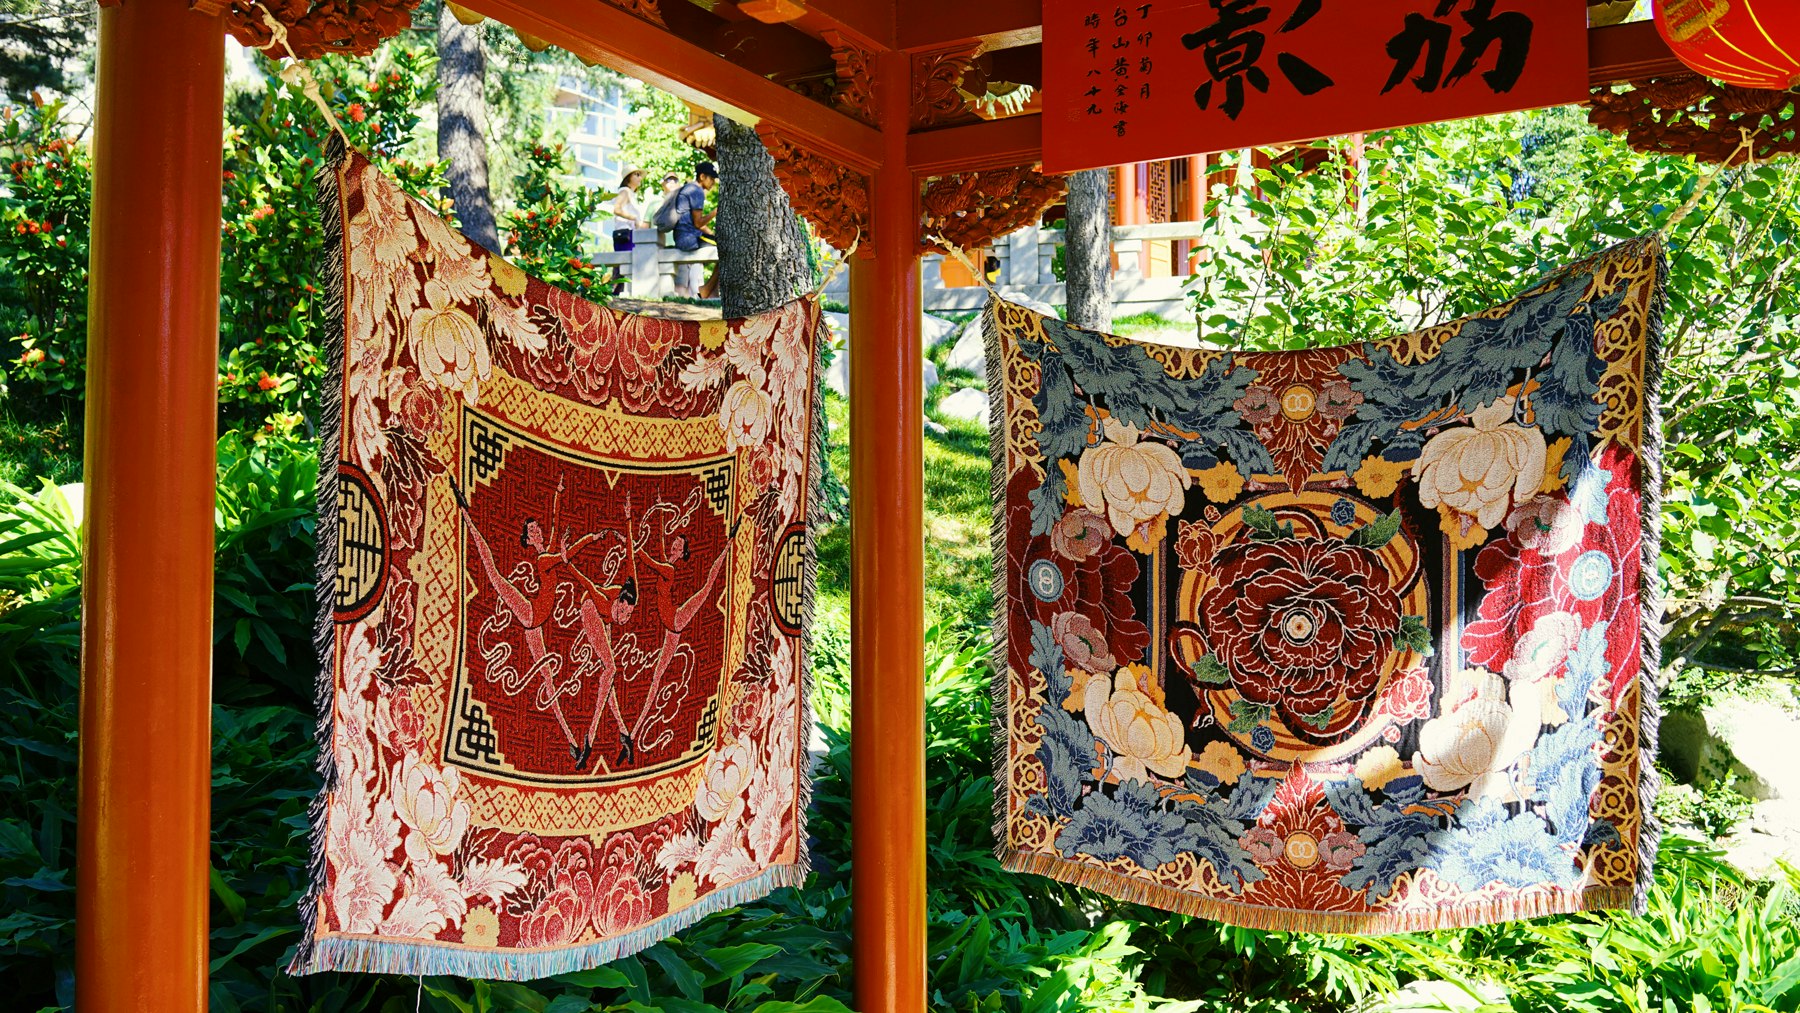 Two woven tapestries suspended from columns in a garden. The one of the left is woven from red, gold and pink colours with three dancers centred and framed by flowers. The one on the right is composed from red and white petals, and blue leaves.